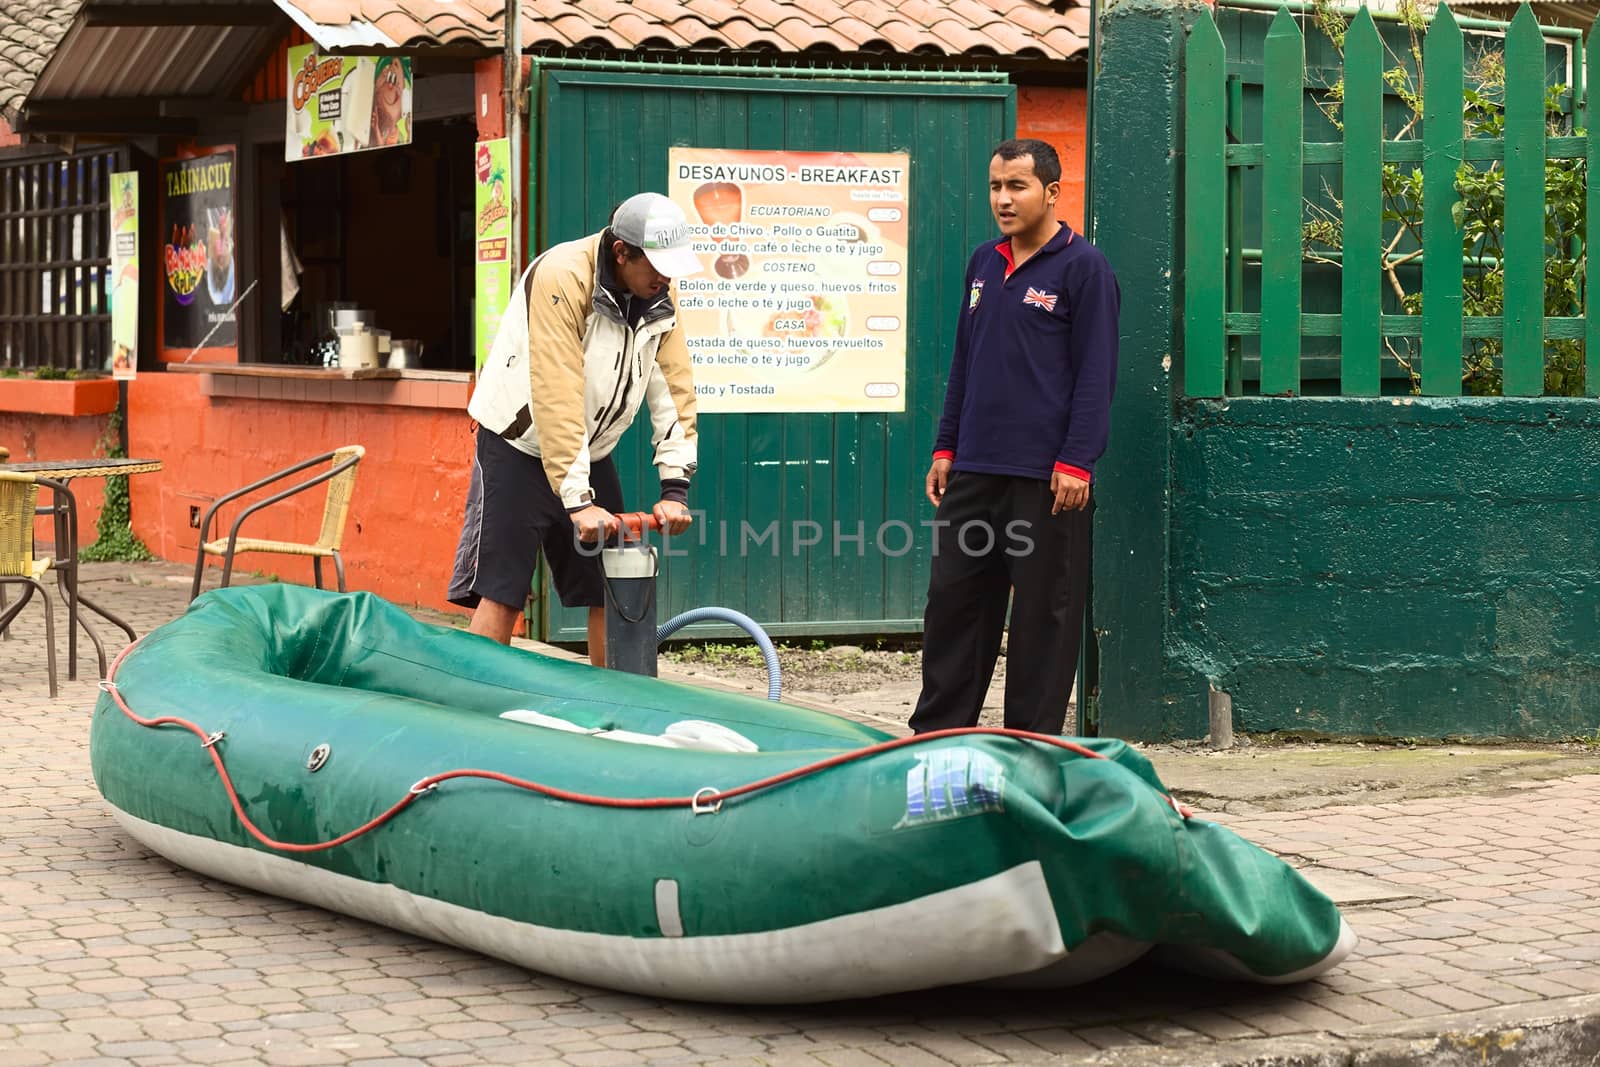 BANOS, ECUADOR - FEBRUARY 25, 2014: Unidentified people inflating a rubber boat on 16 de Diciembre Street on February 25, 2014 in Banos, Ecuador. Banos is known and visited for its various outdoor activities, such as rafting, canyoning, bridge jumping, etc. 